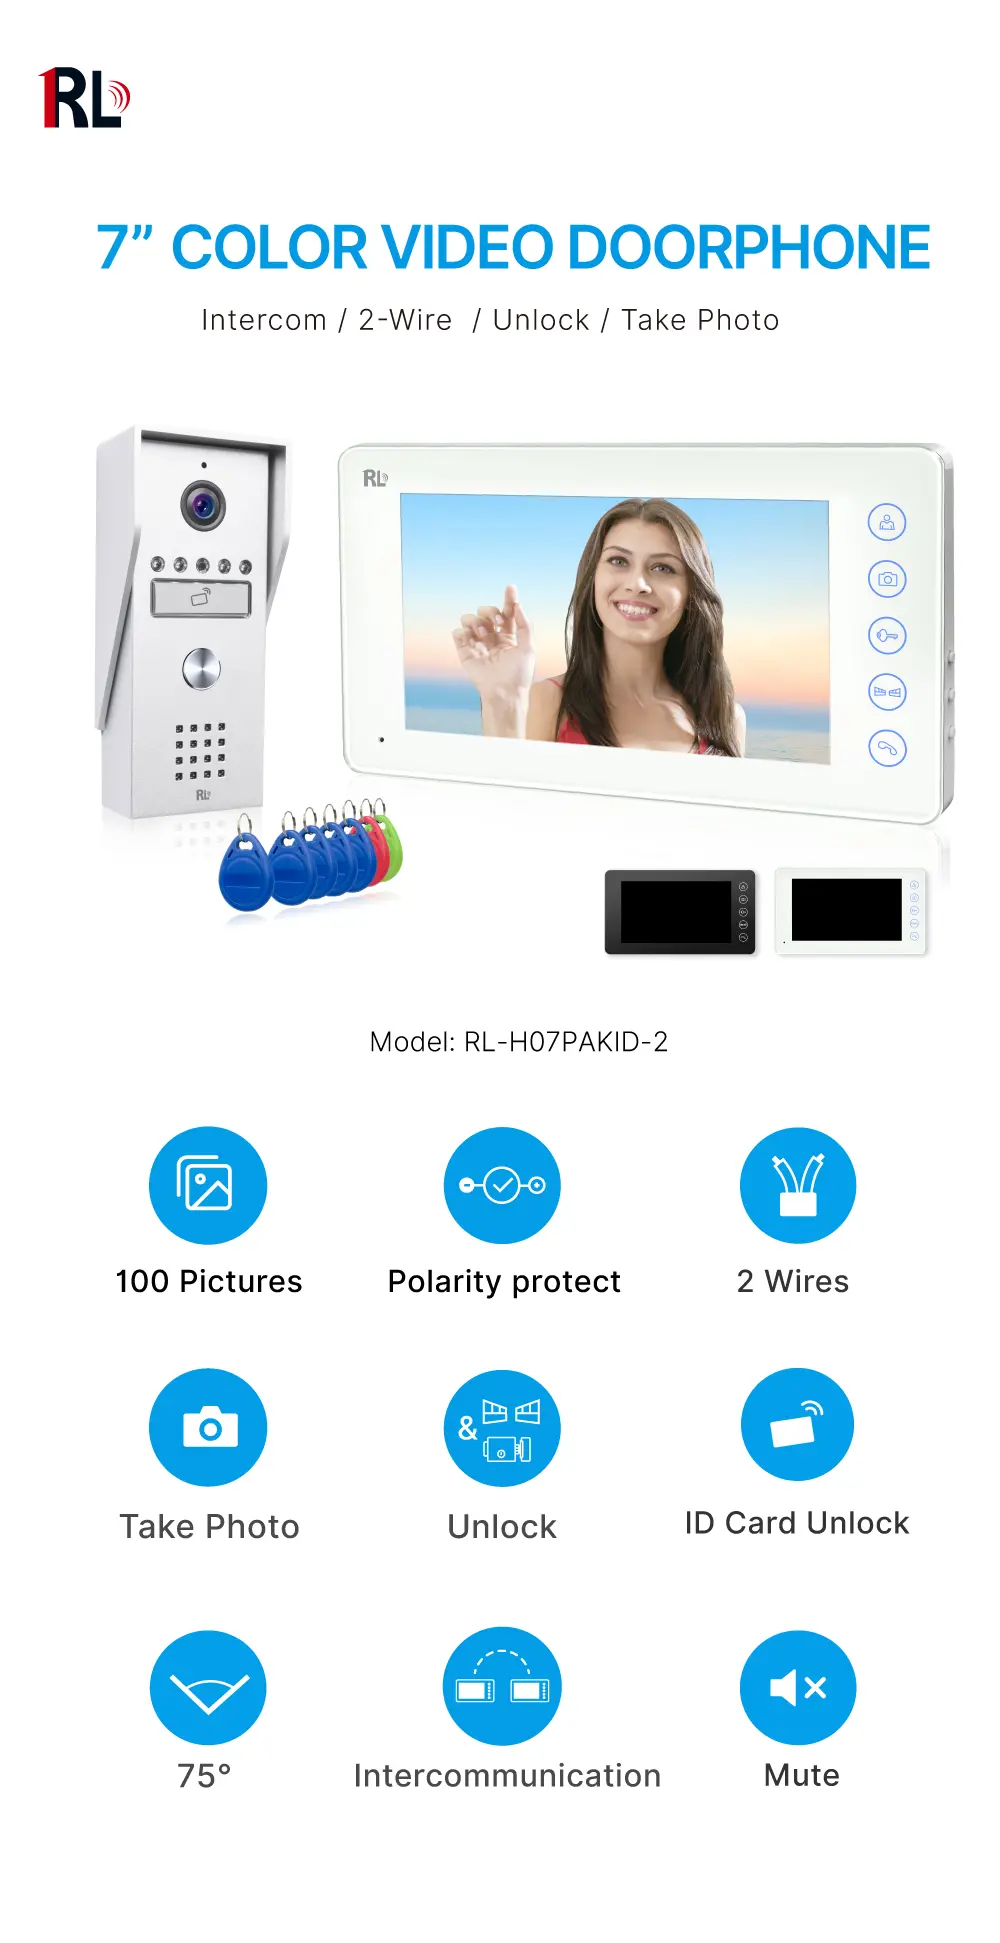  ●Model # RL-H07PAKID-2 ●Tuya remote control from smart phone. ●Easy 4 wires connection, DIY. ●7 inch TFT screen, 800*480 resolution. ●Touch button monitor, white and black colors for option. ●Receive video call and intercom via monitor. _01